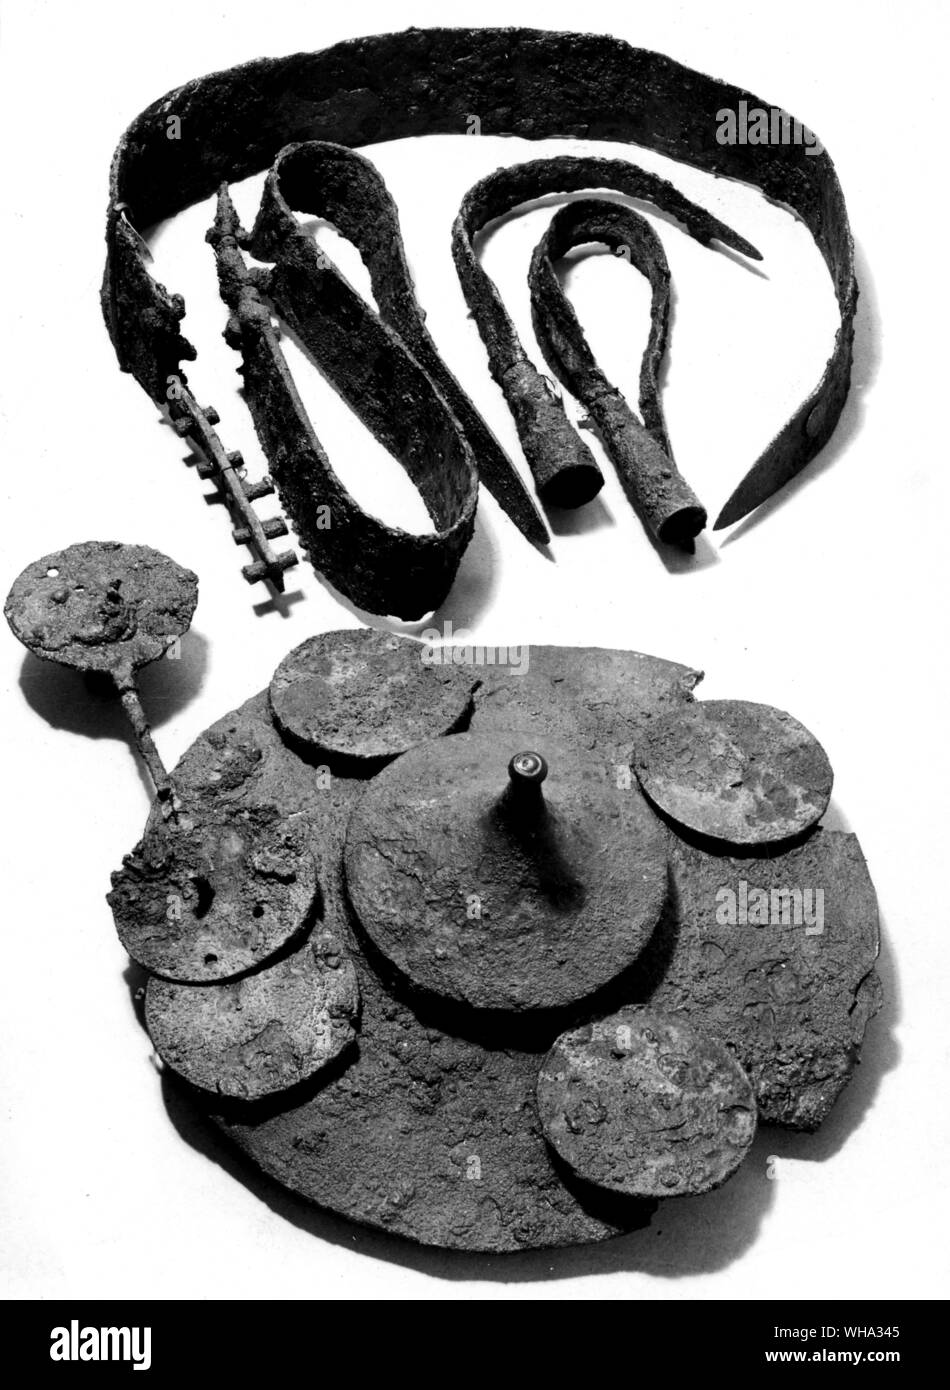 Sweden: Early Iron Age artifacts. Stock Photo